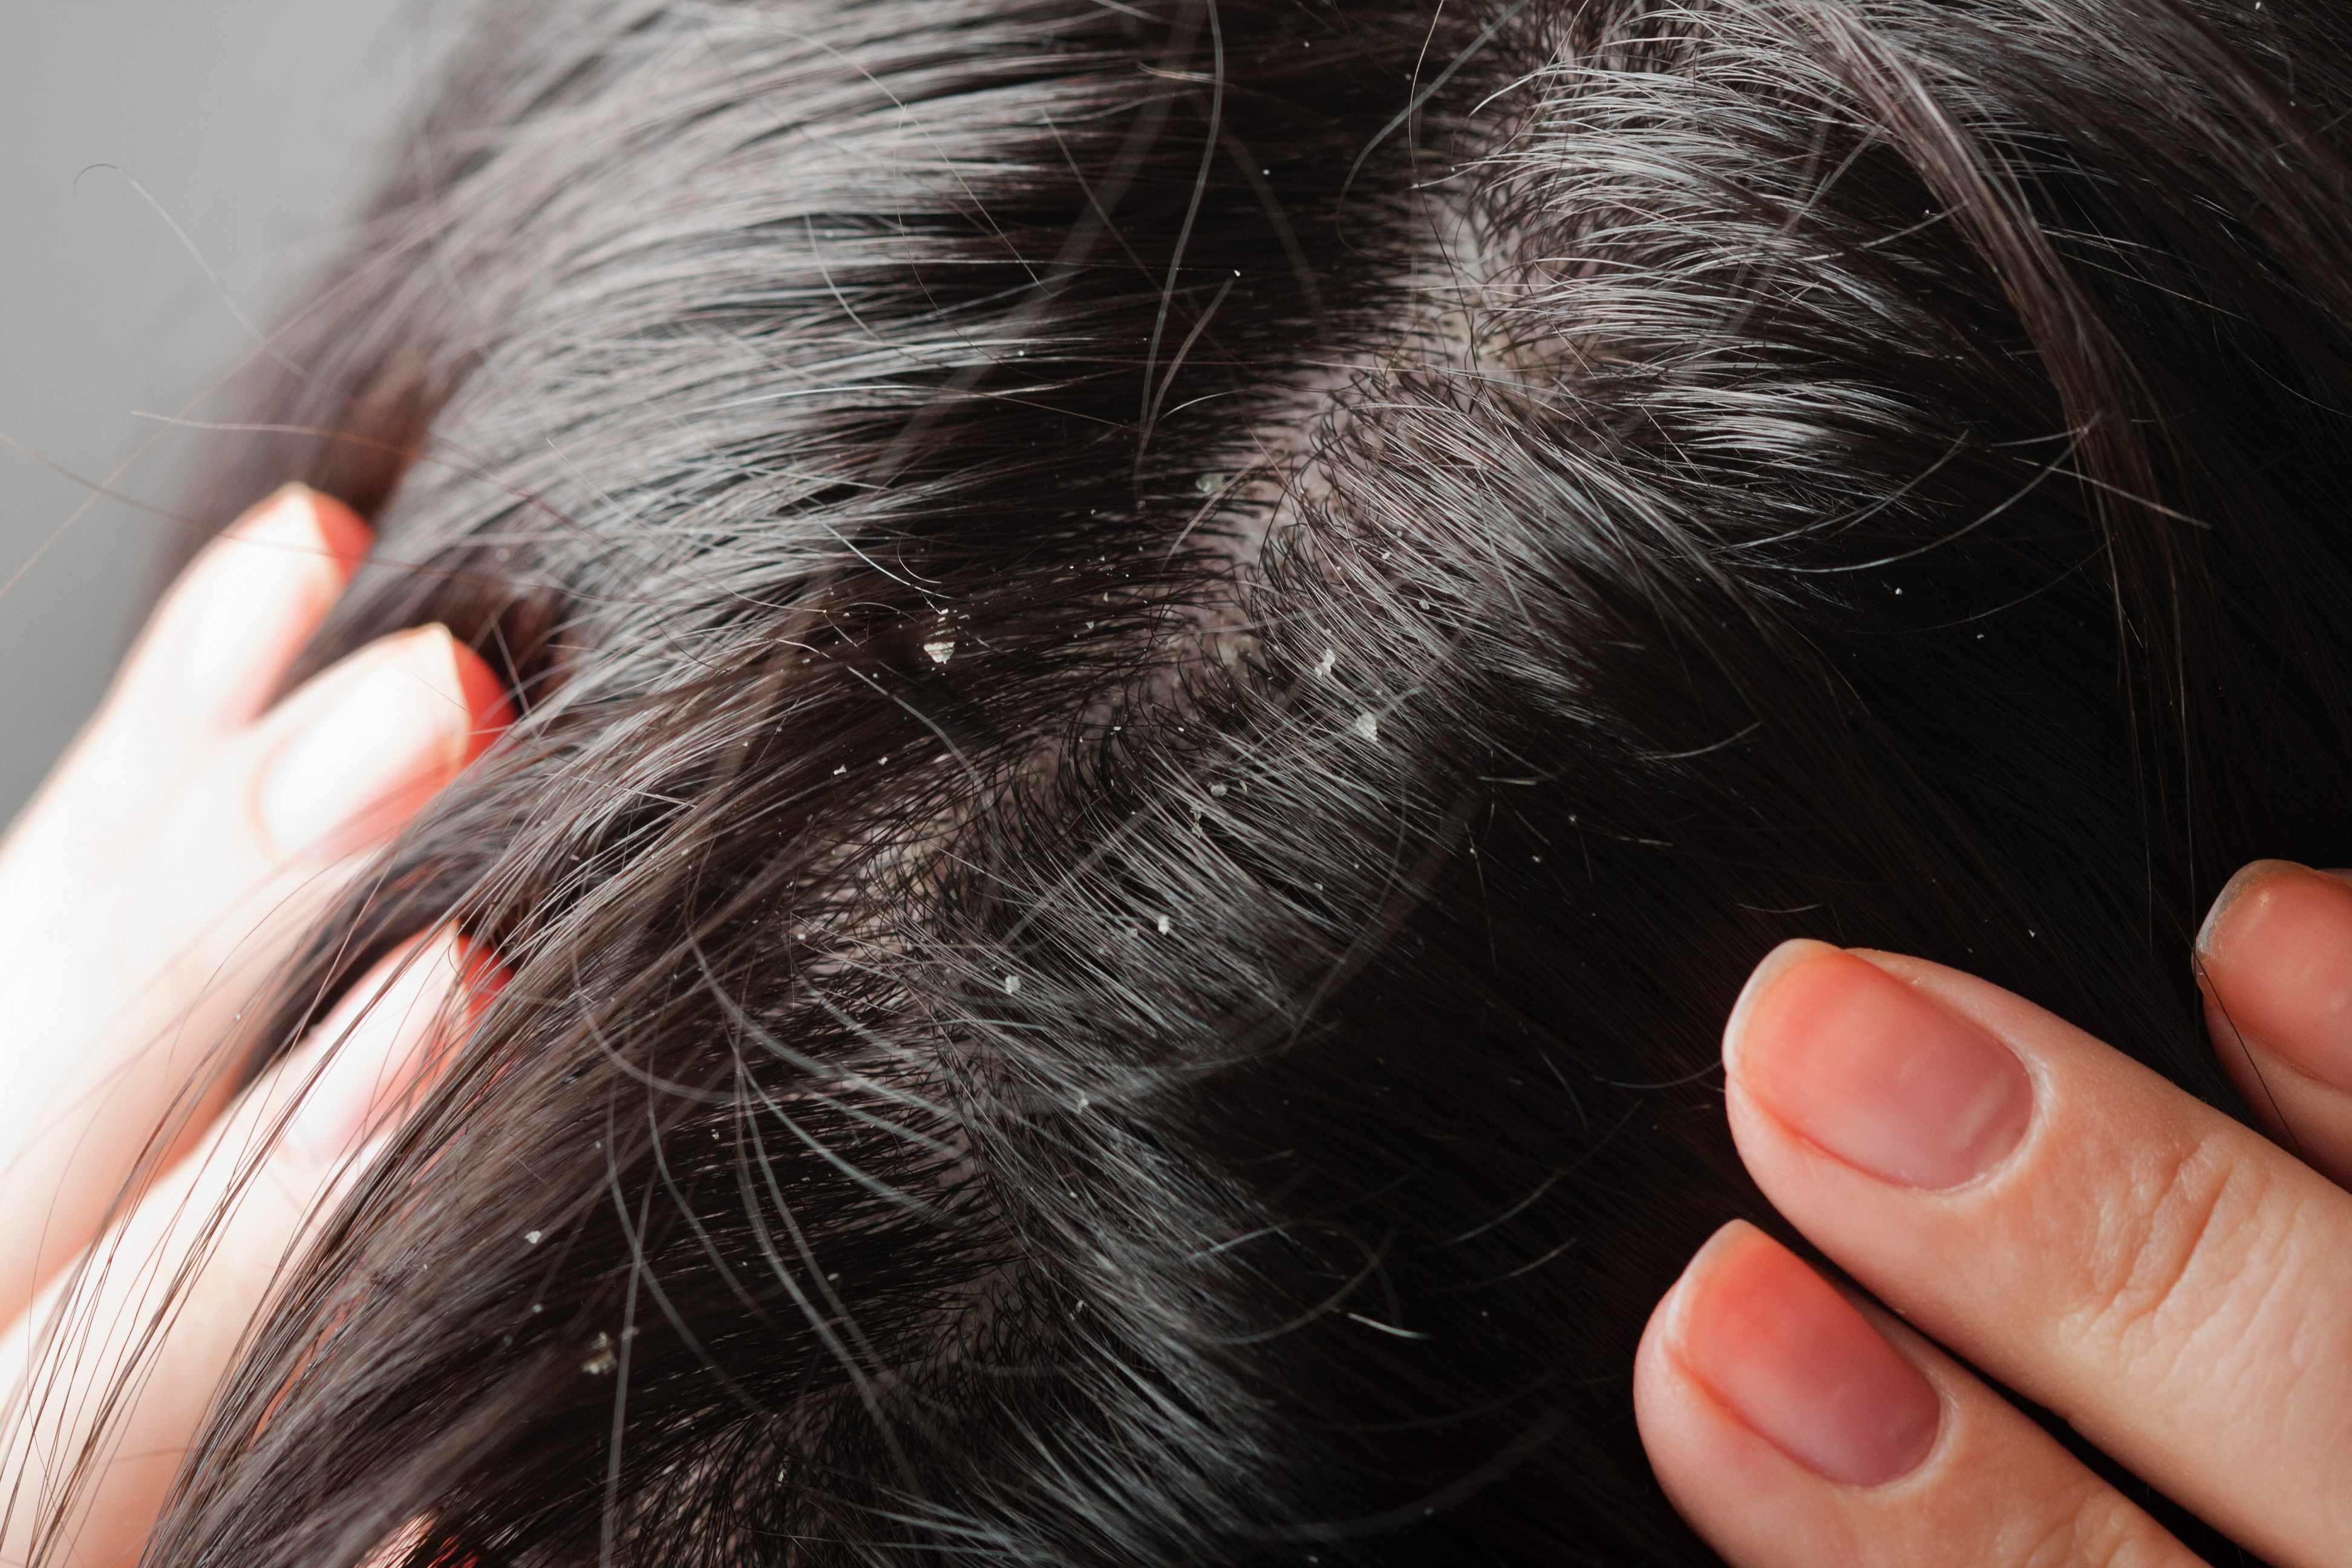 a woman with dark brown or blach hair showing the dandruff on her scalp